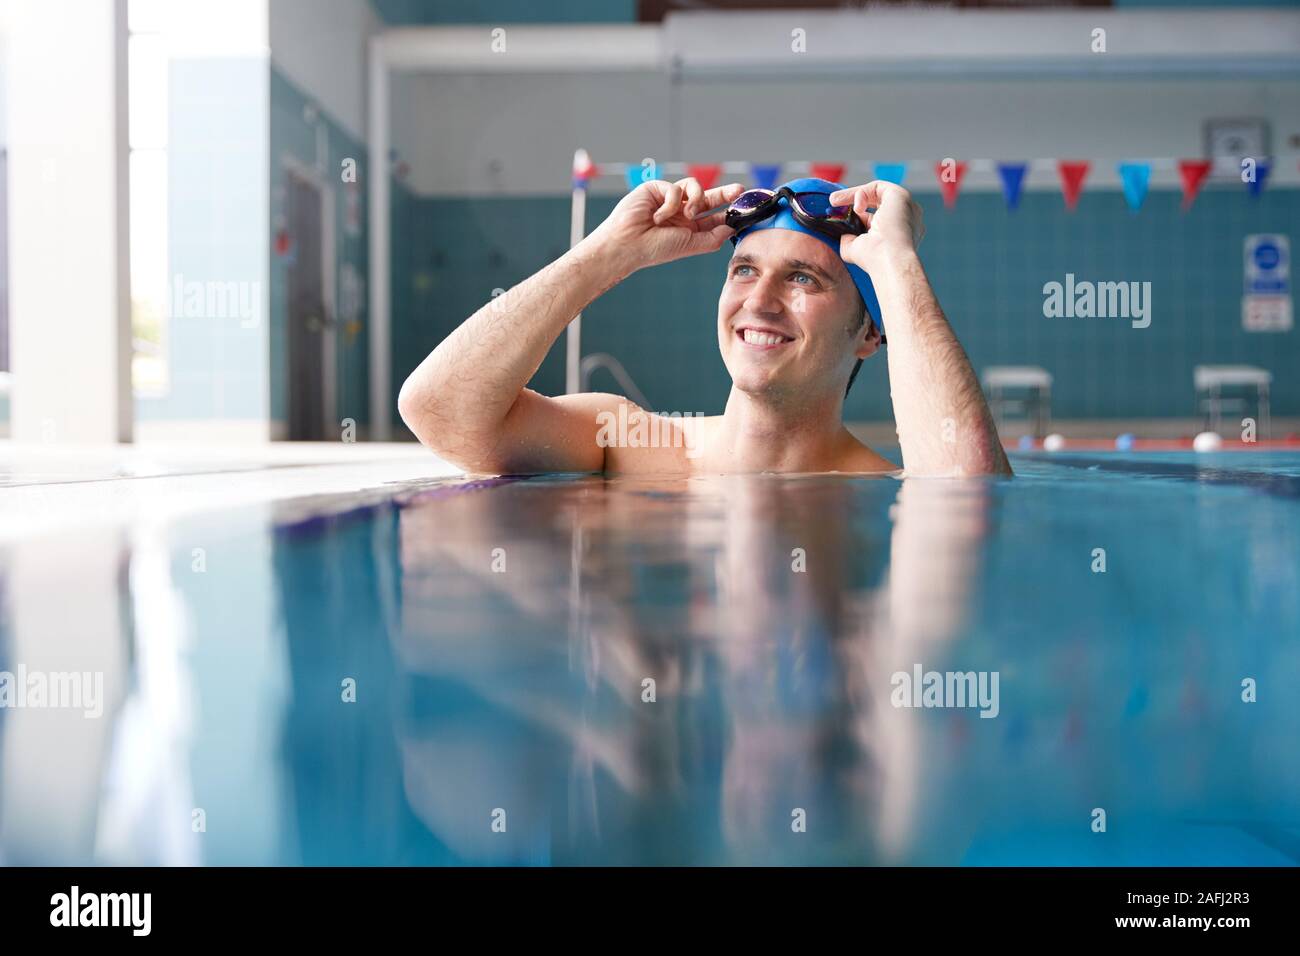 Male Swimmer Wearing Hat And Goggles Training In Swimming Pool Stock Photo